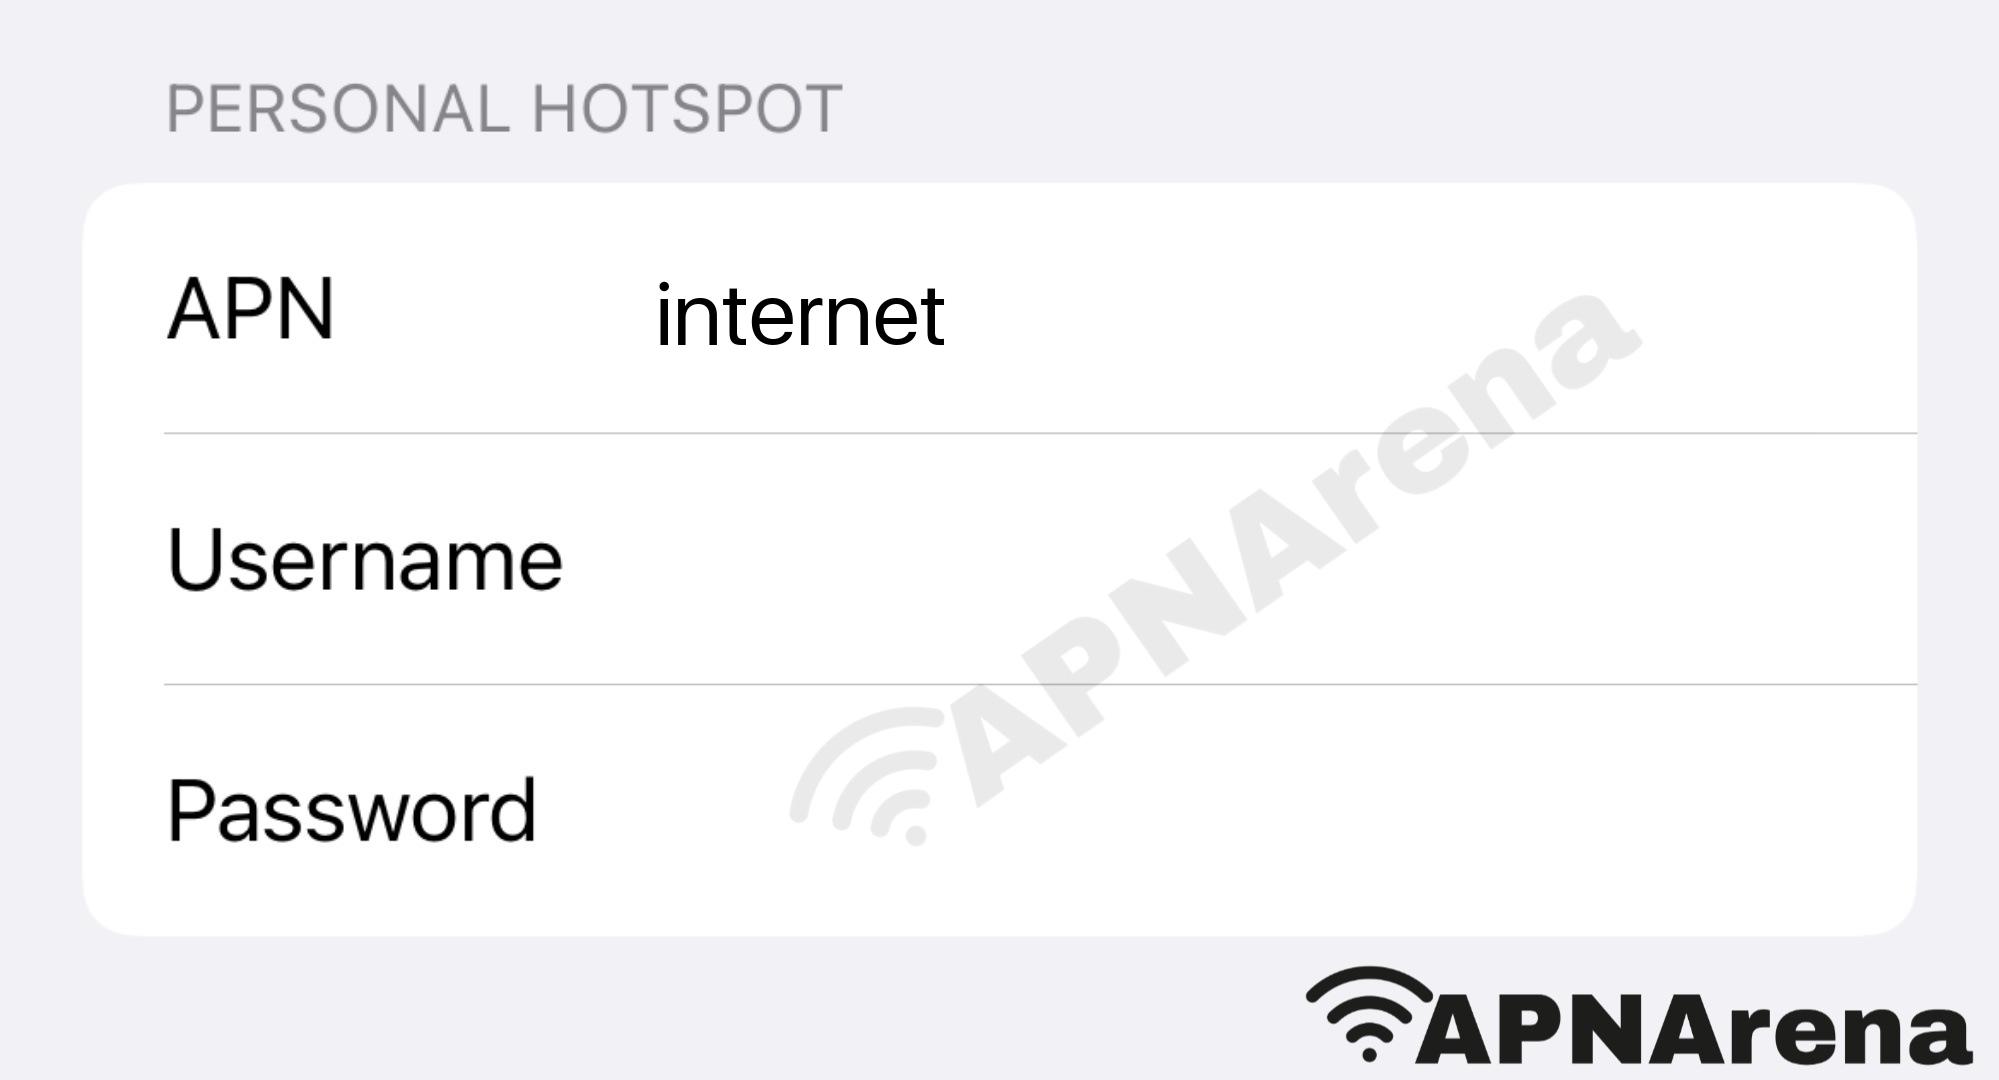 DST (Datastream Technology Sdn Bhd) Personal Hotspot Settings for iPhone